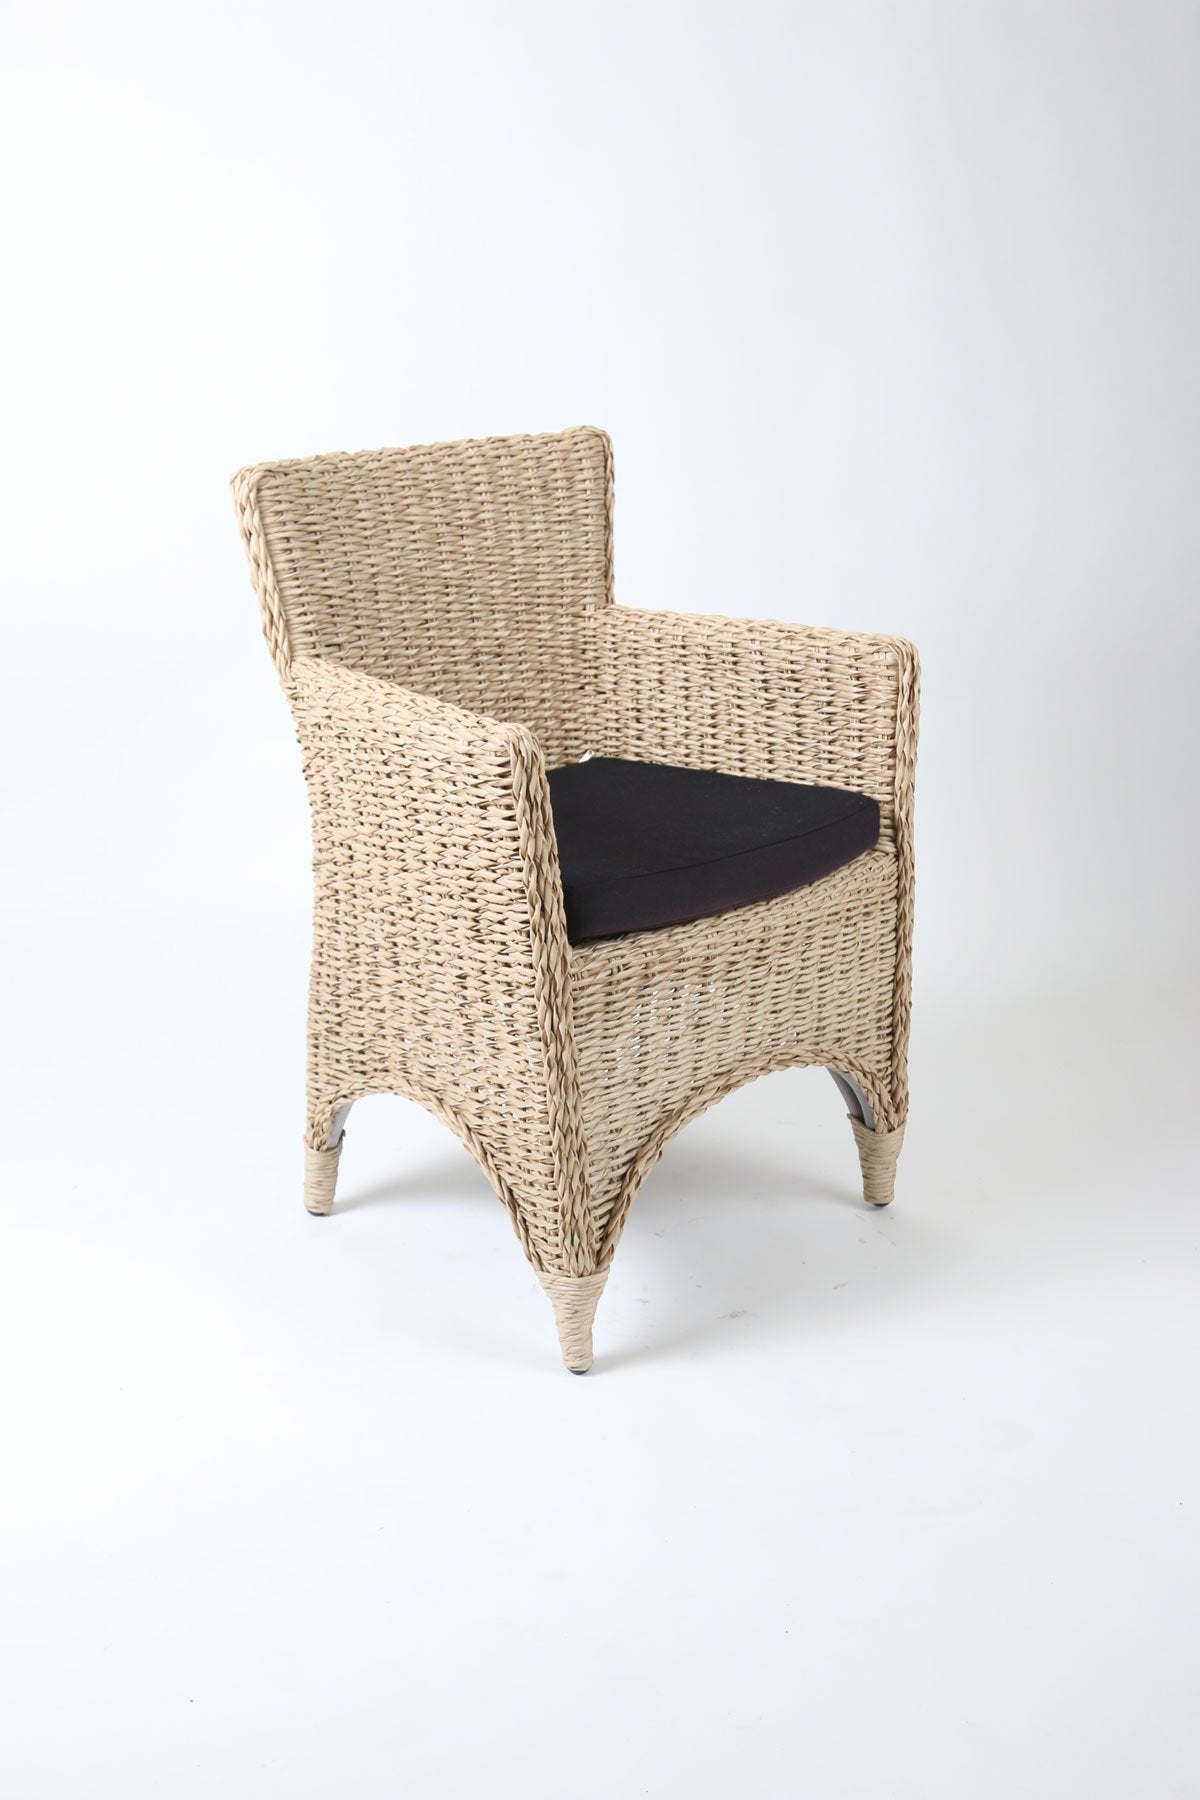 Light Honey Twisted Wicker Chair with Black Cushion